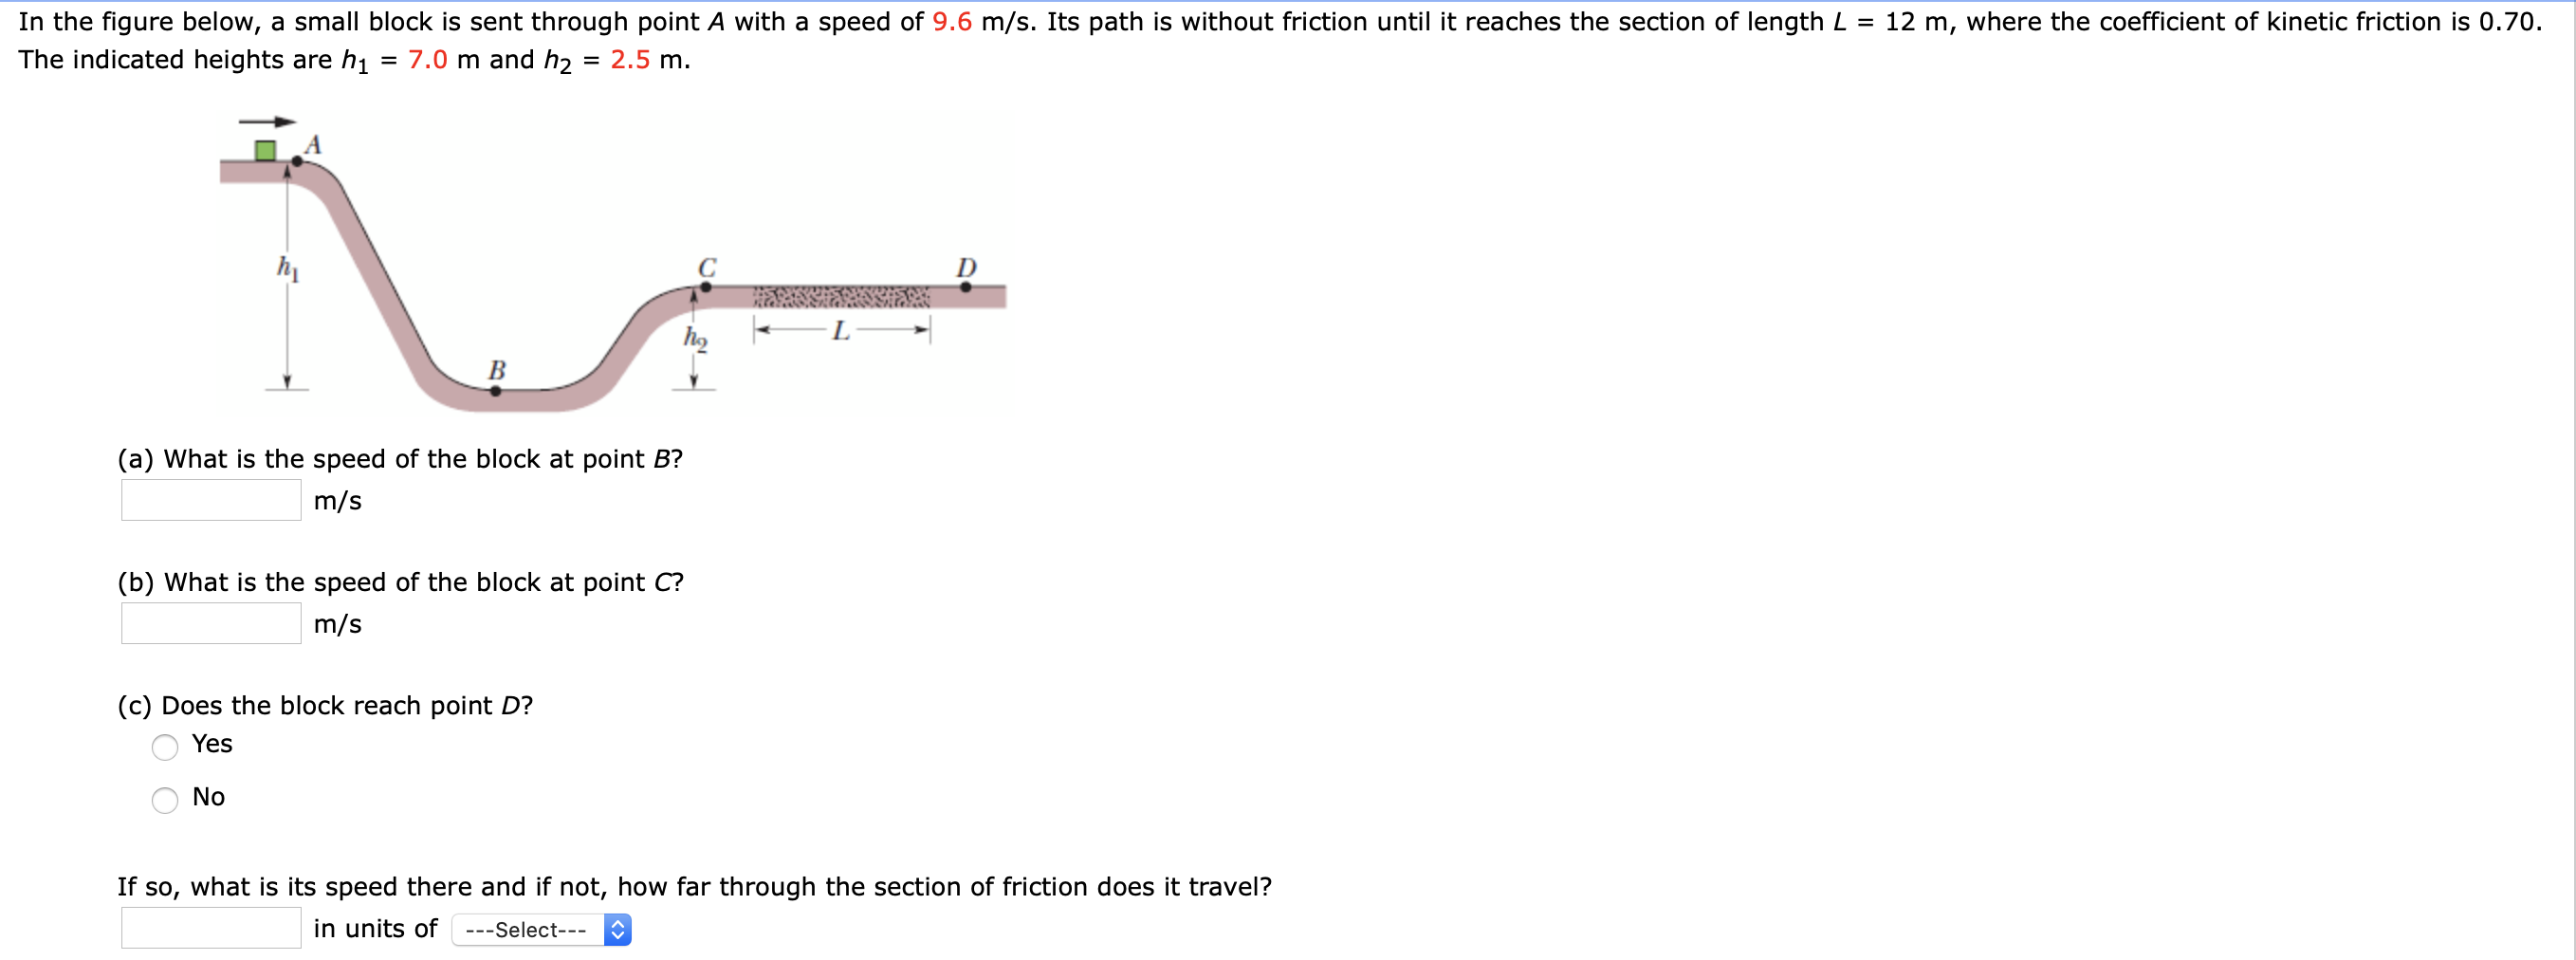 In the figure below, a small block is sent through point A with a speed of 9.6 m/s. Its path is without friction until it reaches the section of length L =
12 m, where the coefficient of kinetic friction is 0.70.
The indicated heights are h1
= 7.0 m and h2 = 2.5 m.
(a) What is the speed of the block at point B?
m/s
(b) What is the speed of the block at point C?
m/s
(c) Does the block reach point D?
Yes
No
If so, what is its speed there and if not, how far through the section of friction does it travel?
in units of
---Select---
